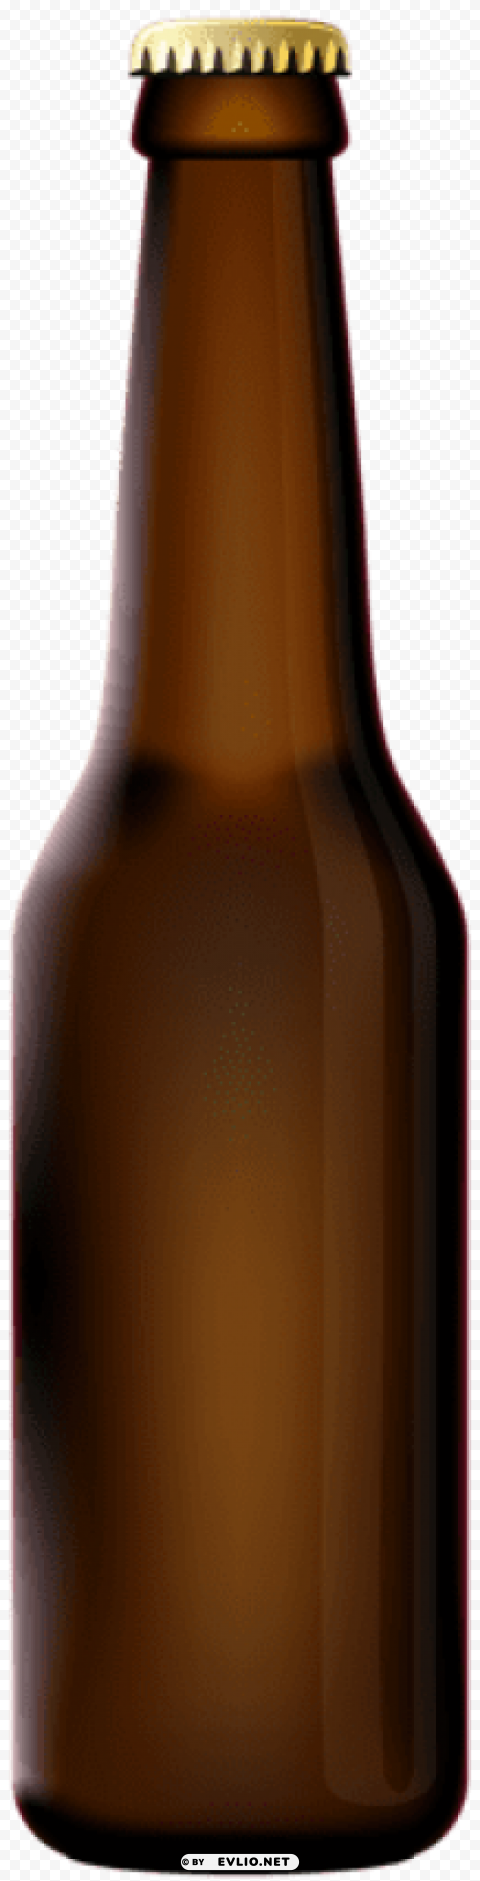 beer bottle PNG images with transparent overlay